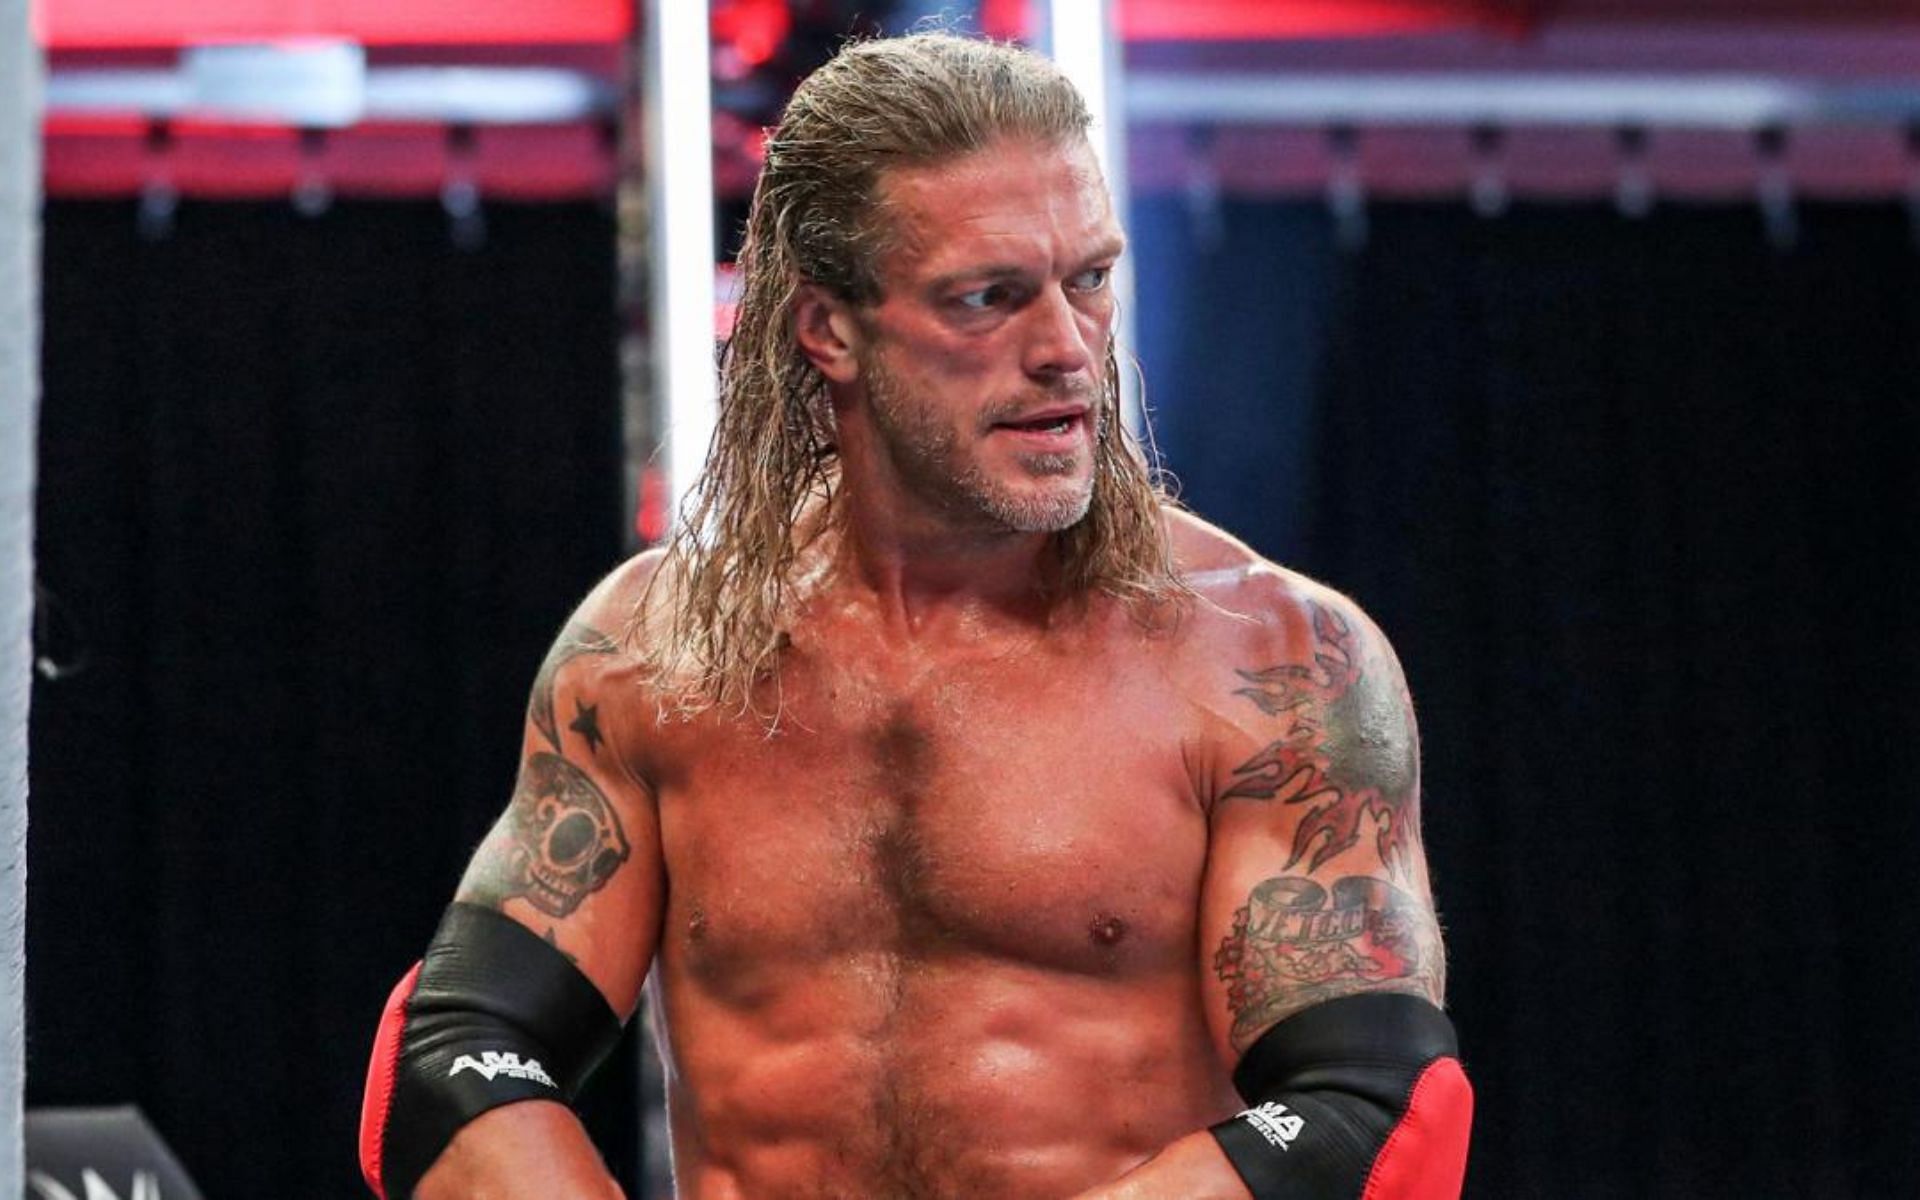 WWE RAW Superstar and Hall of Famer, Edge